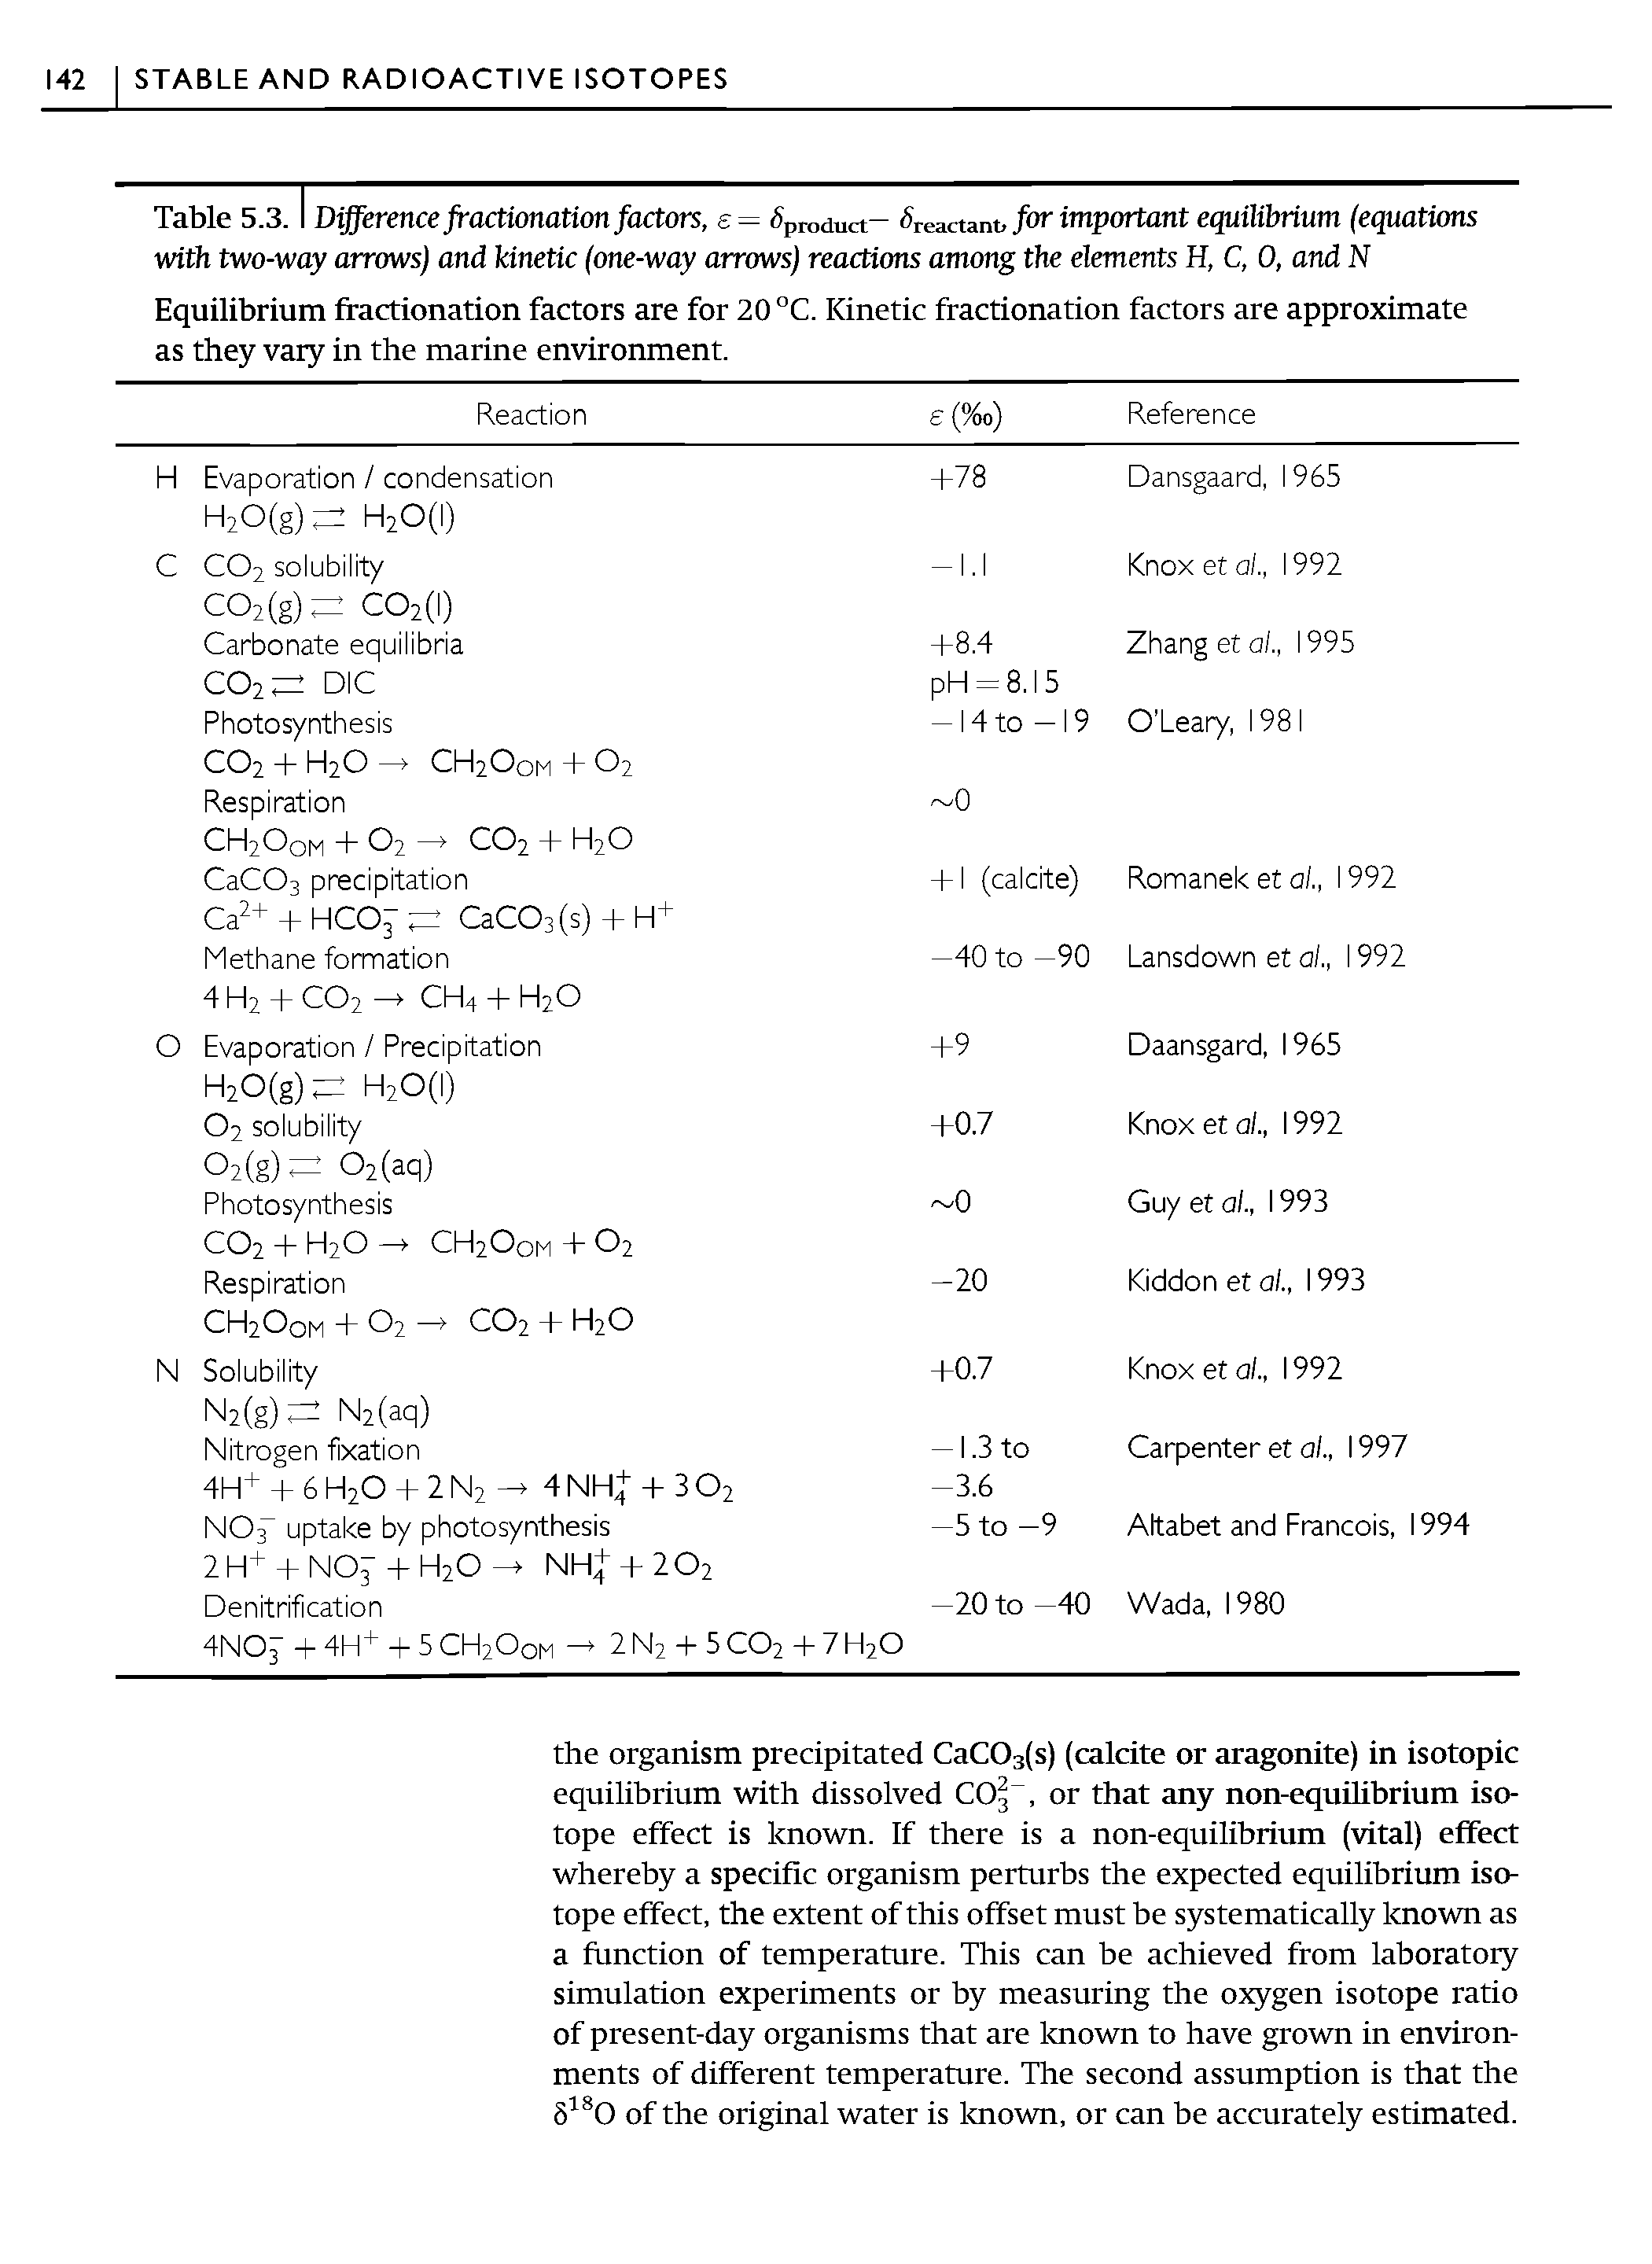 Table 5.3. 1 Difference fractionation factors, e= product- Sre ctant, for important equilibrium (equations with two-way arrows) and kinetic (one-way arrows) reactions among the elements H, C, 0, and N Equilibrium fractionation factors are for 20 °C. Kinetic fractionation factors are approximate as they vary in the marine environment. ...